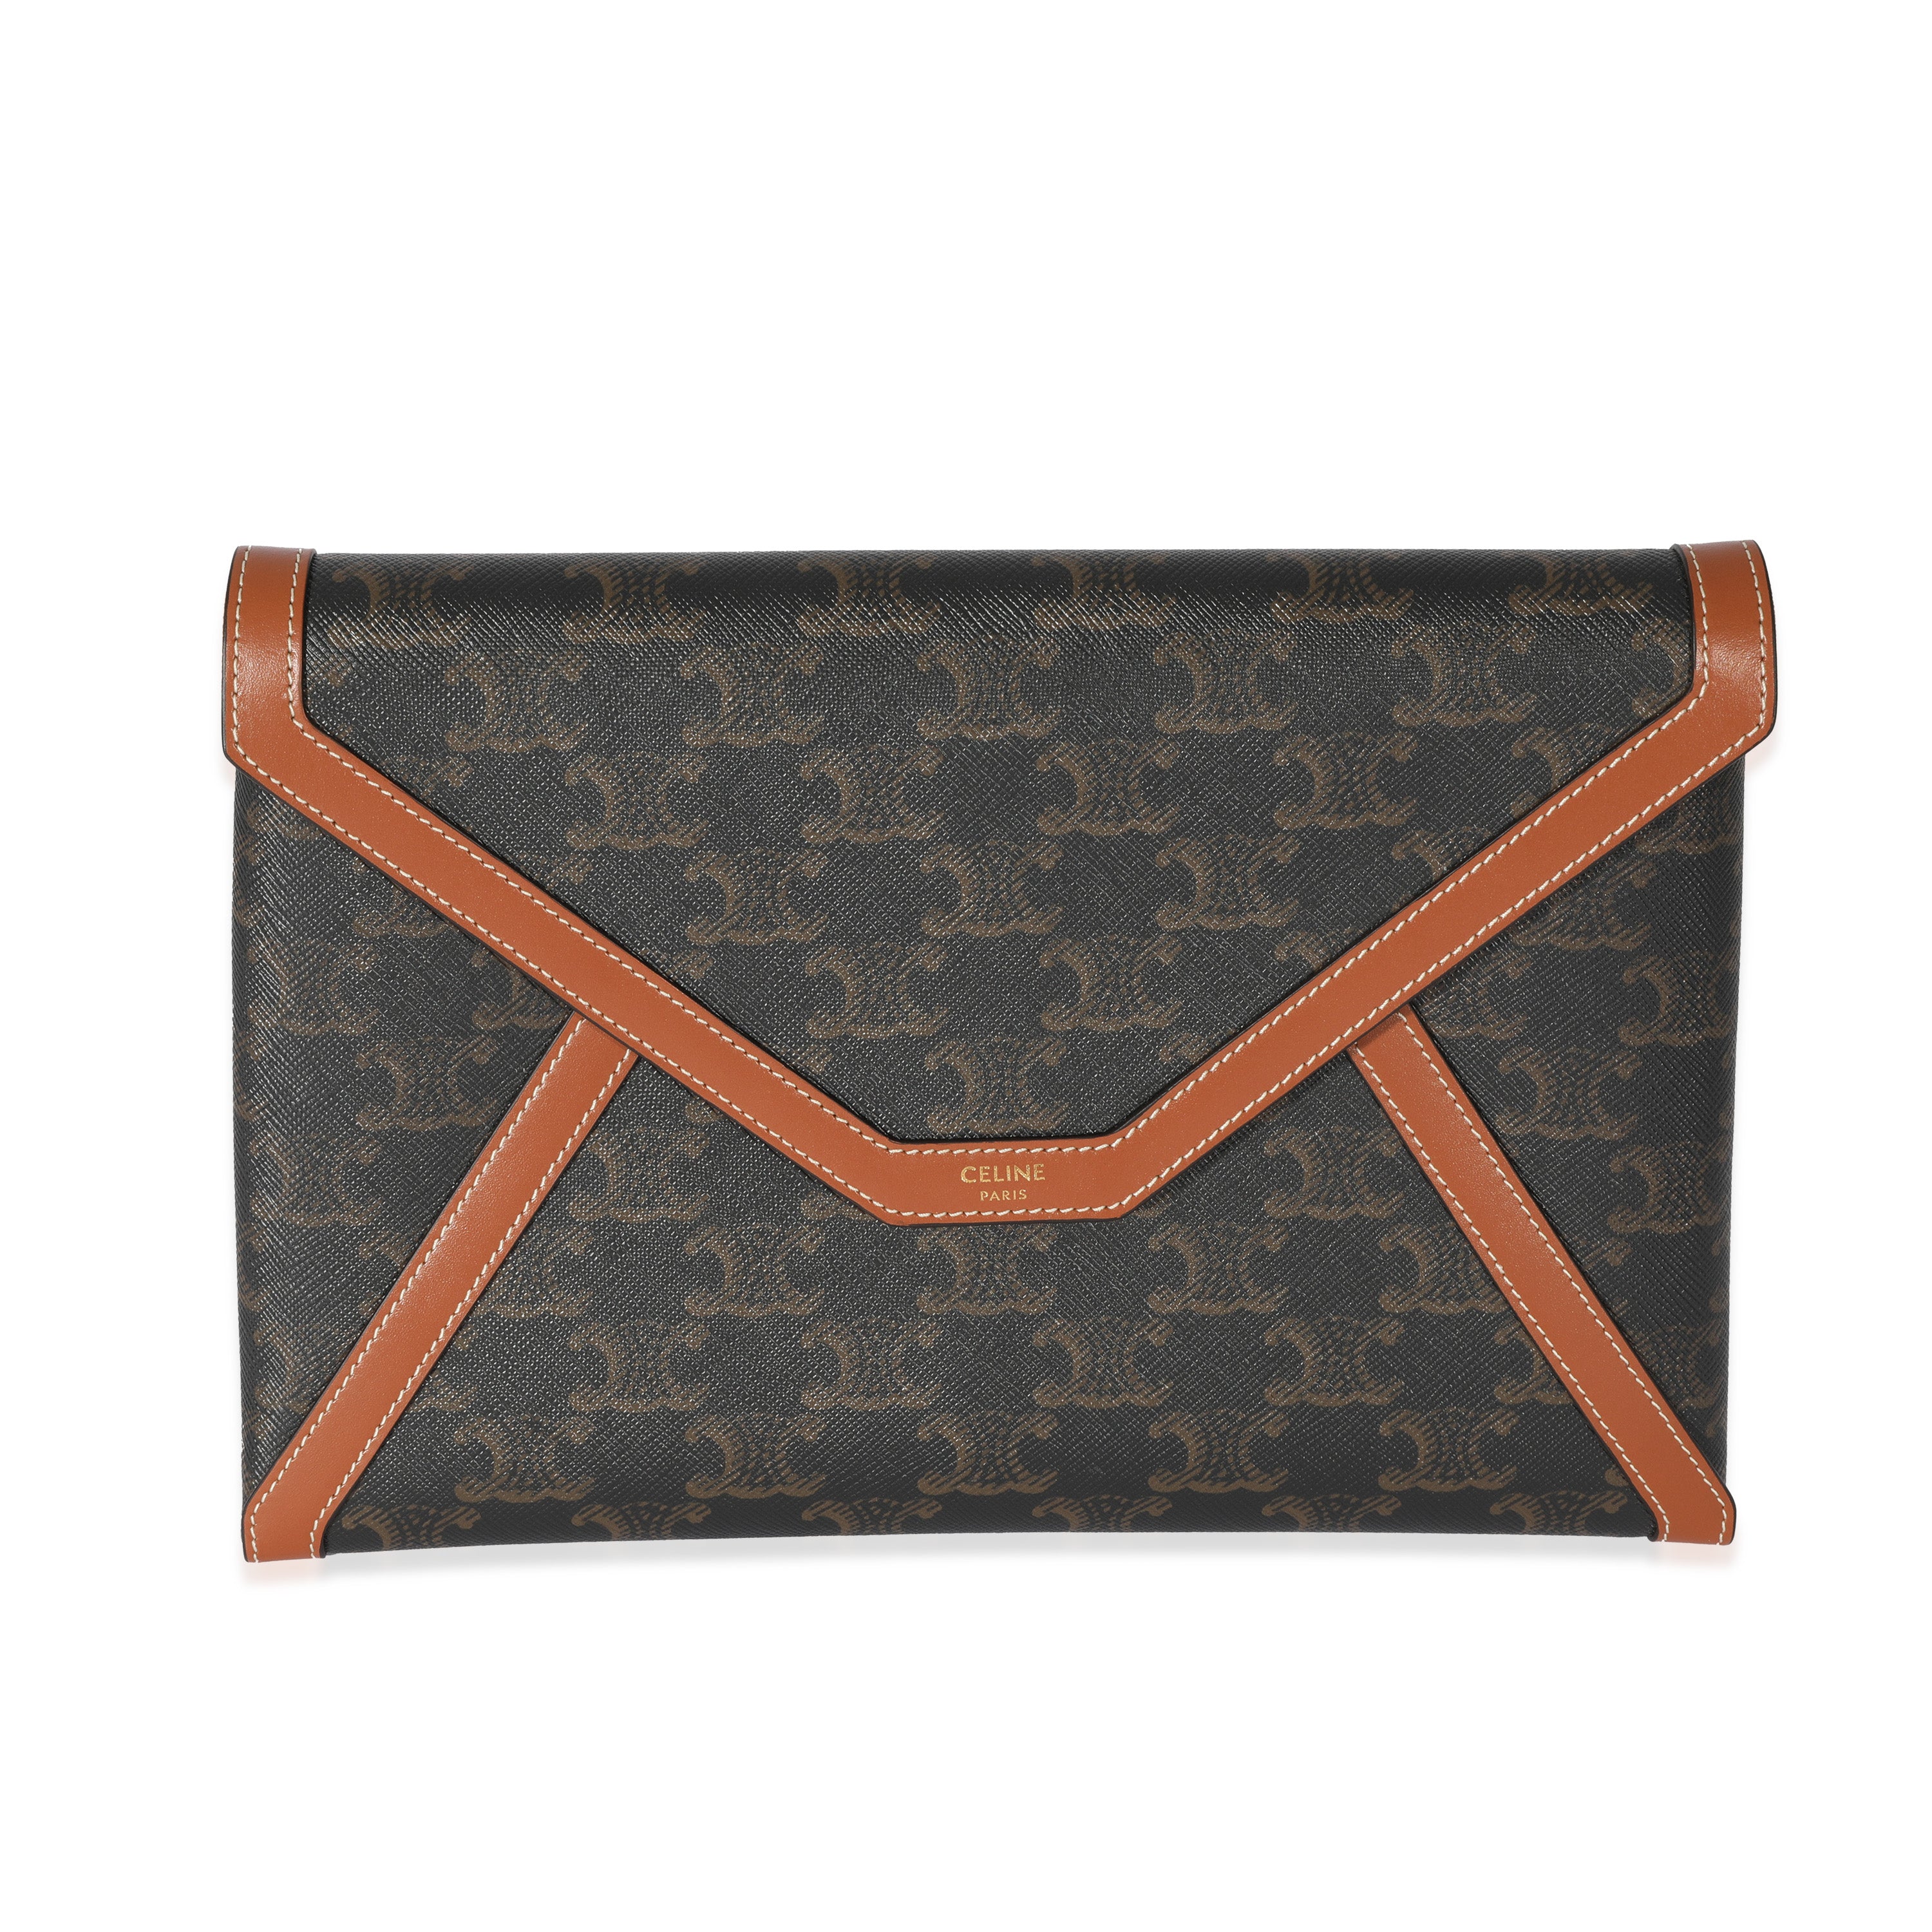 Celine - Jewelry Pouch in Triomphe Canvas and Calfskin Leather - Brown - for Women